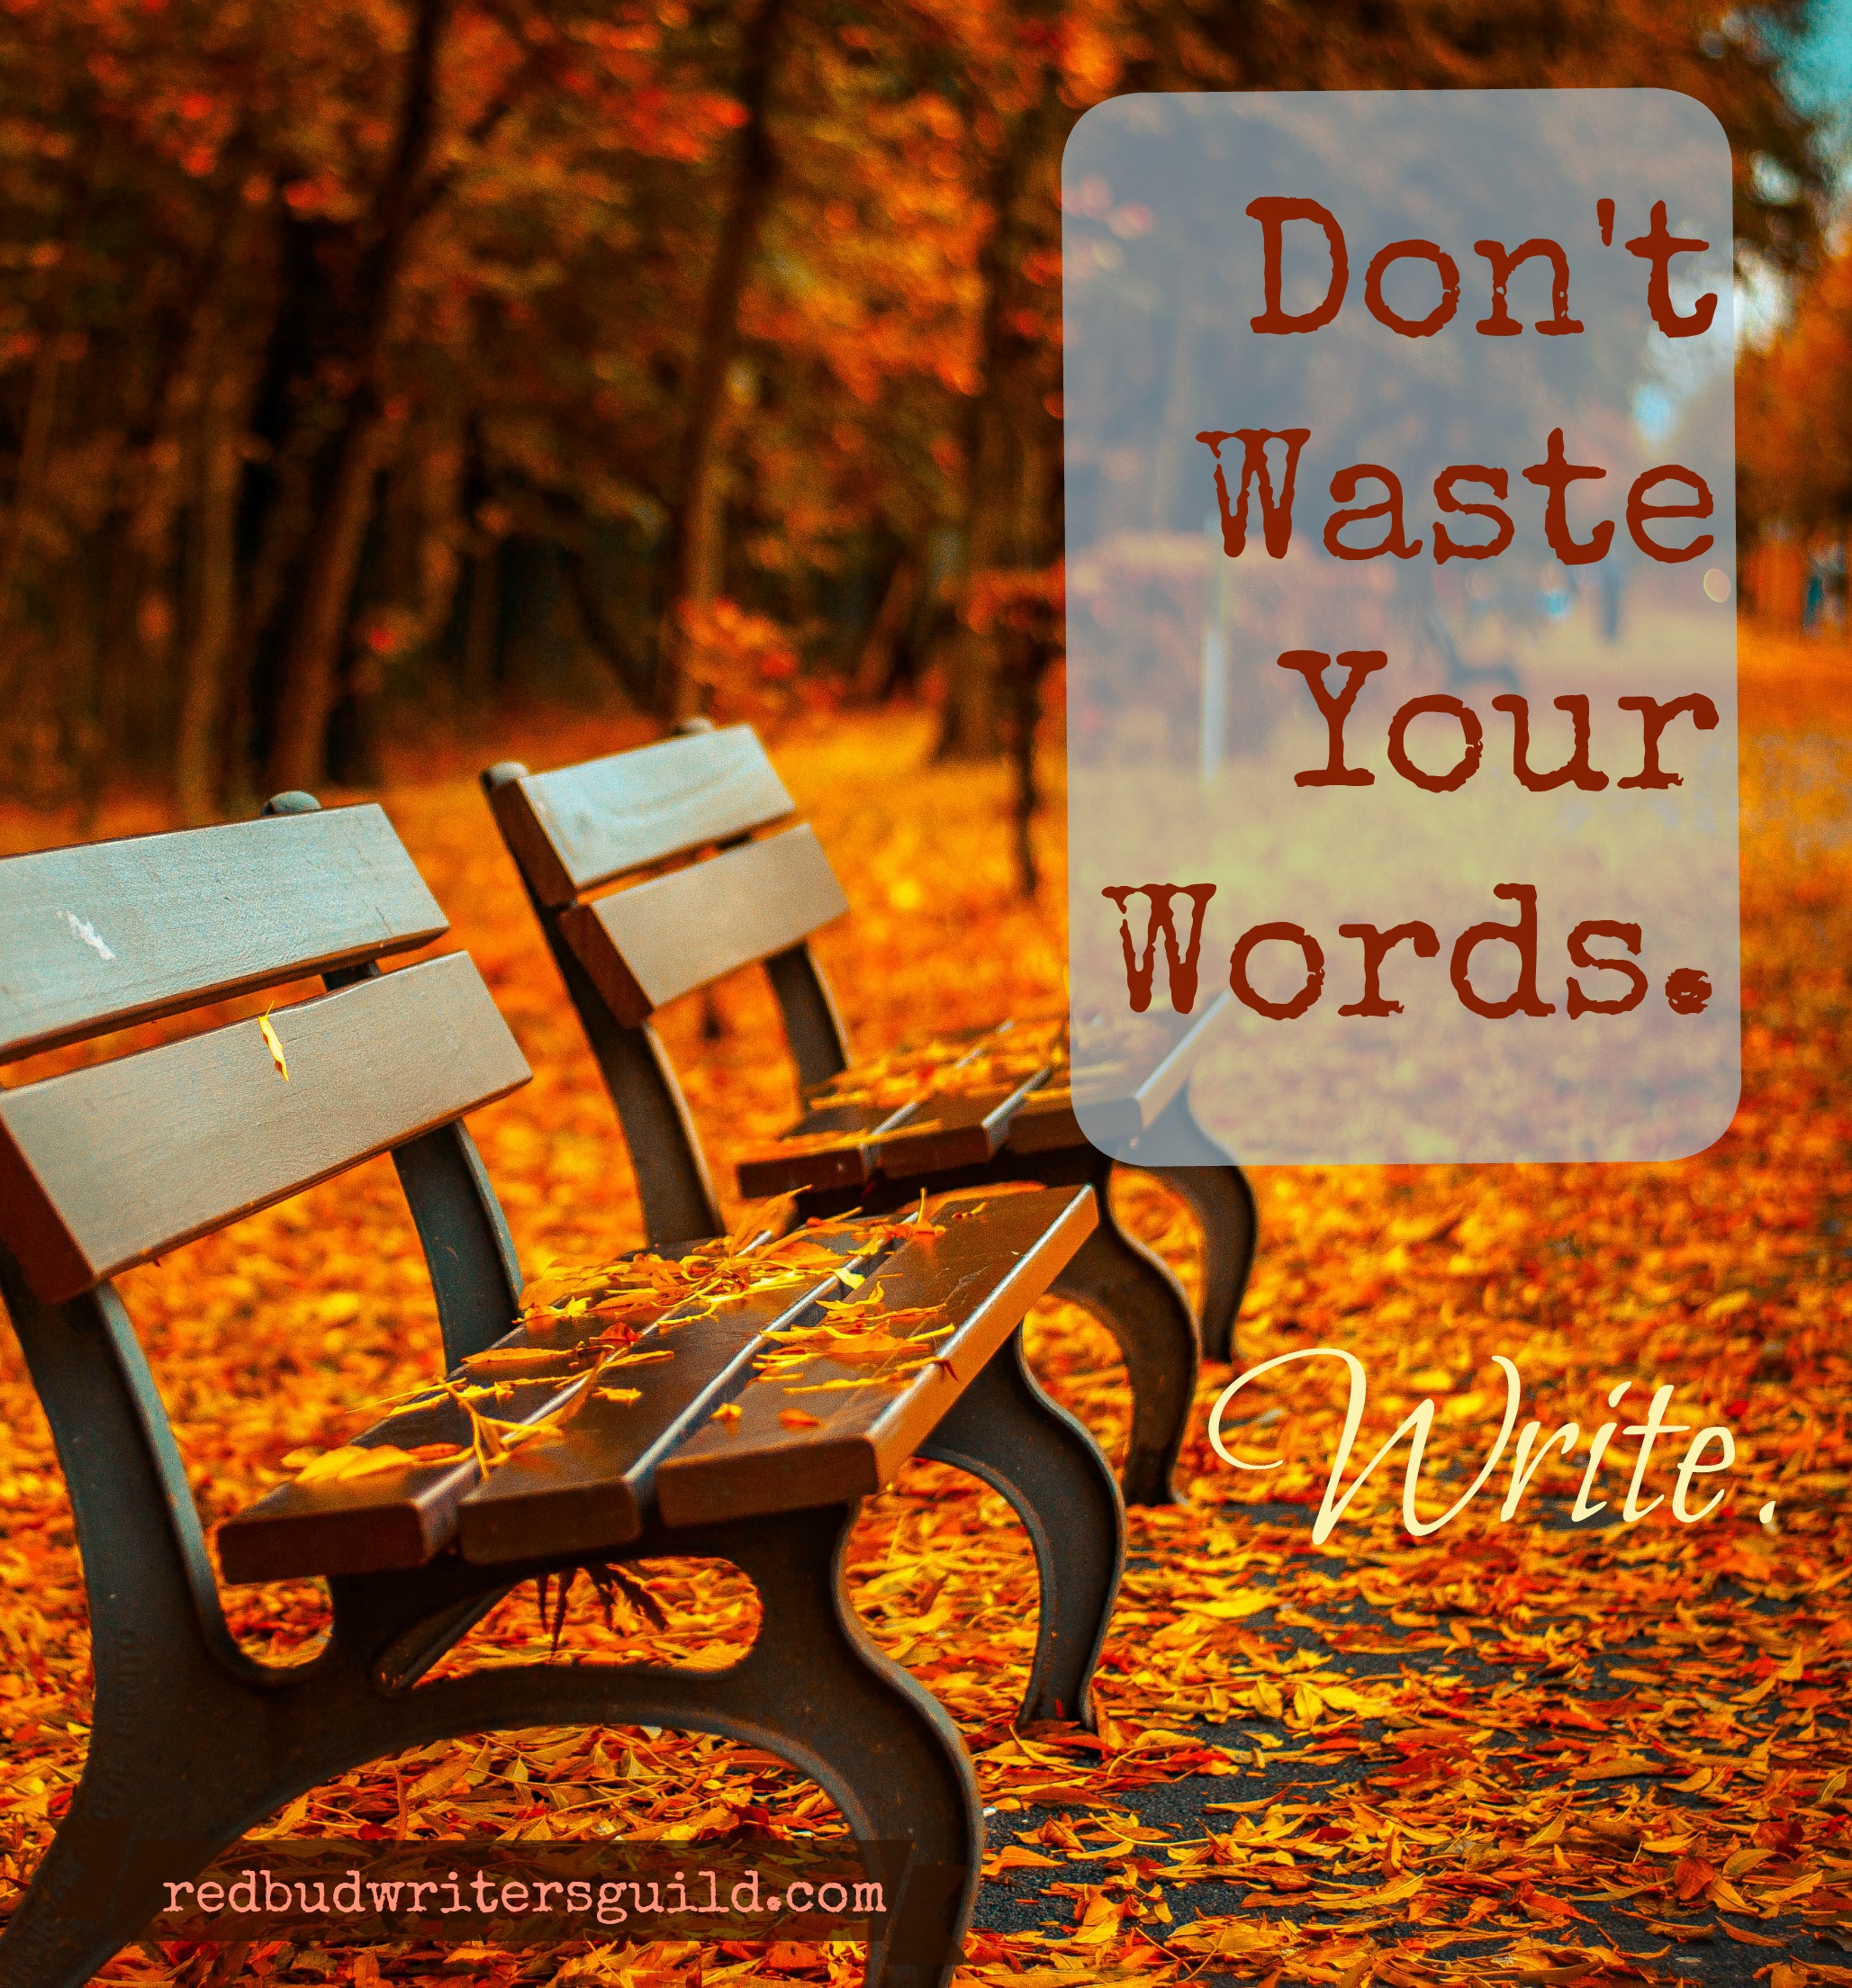 Don't waste your words. Write